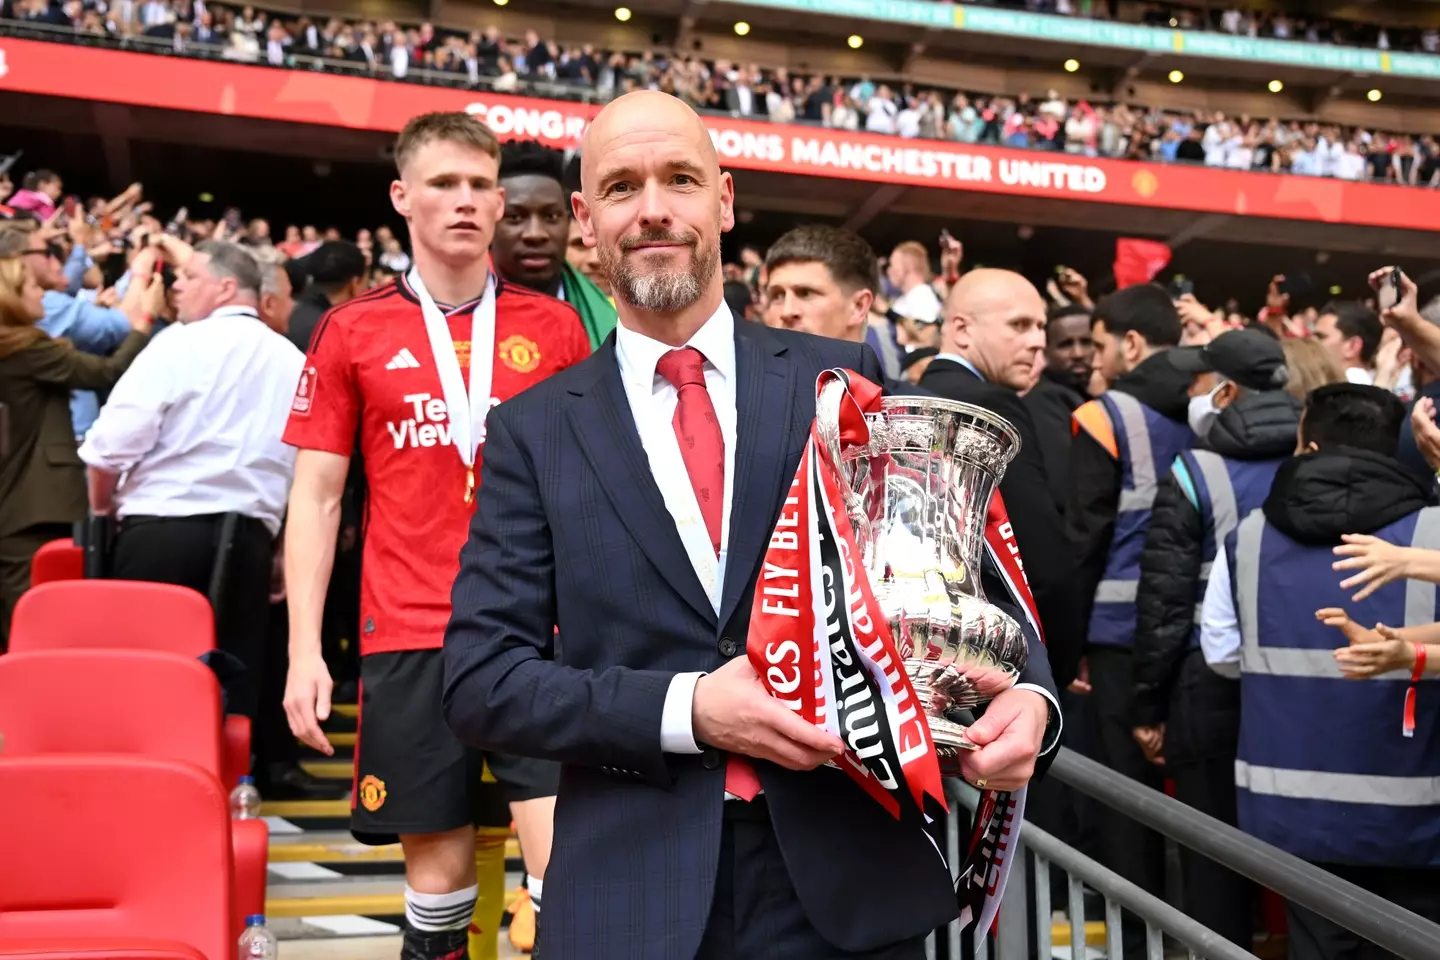 Ten Hag has become the first United manager since Ferguson to win silverware in successive seasons (Getty)